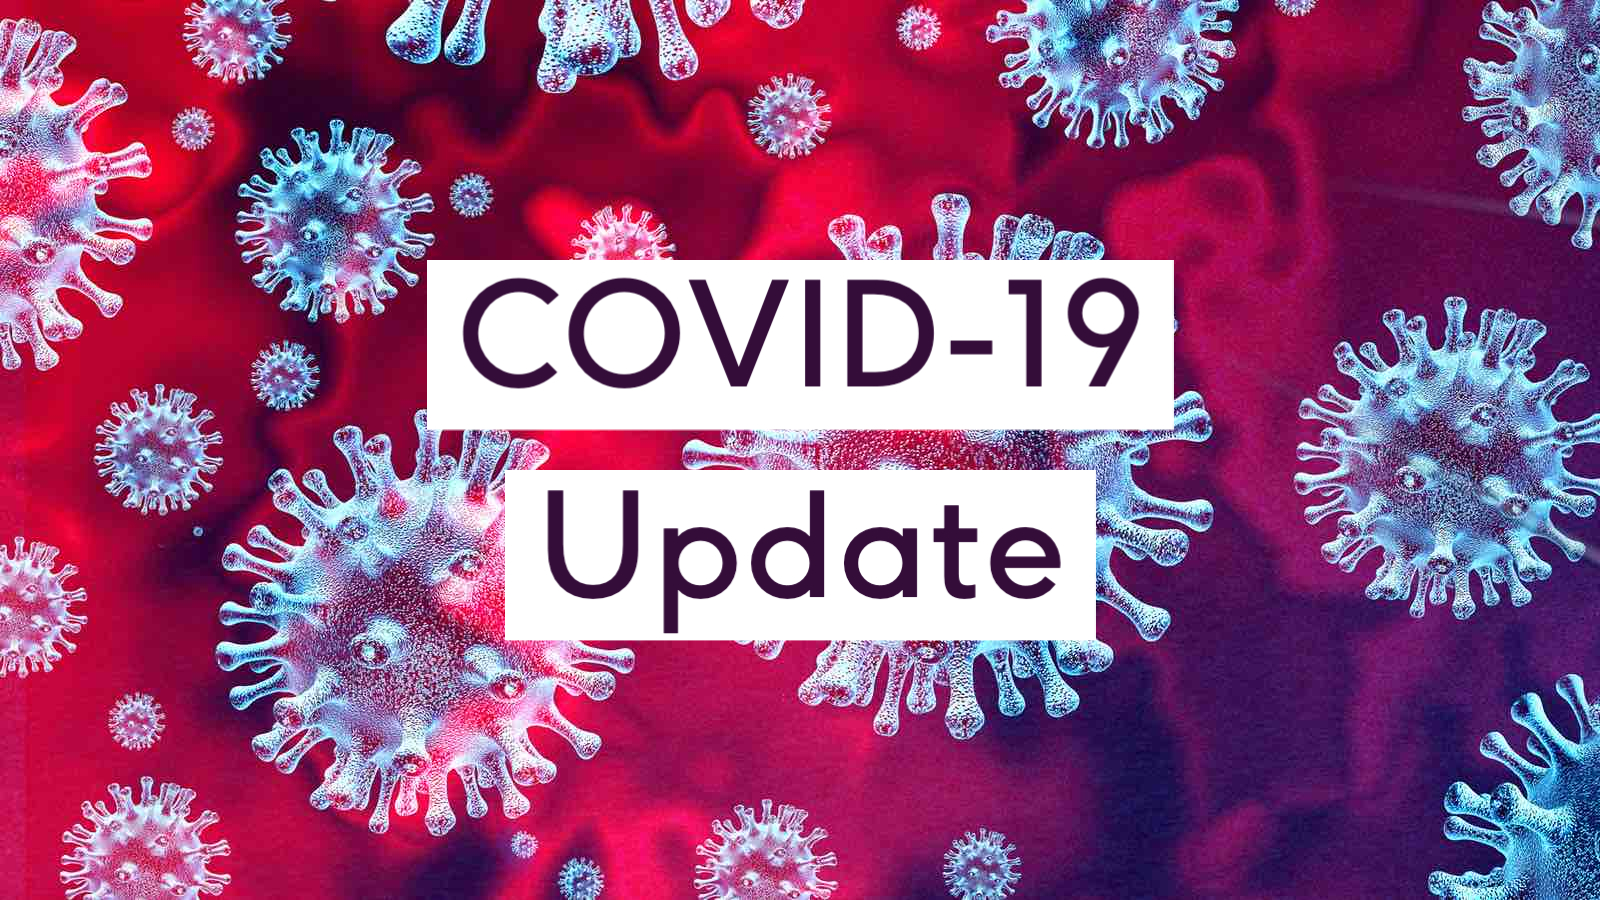 Nepal recorded 241 new COVID-19 cases in last 24 hours, with no deaths